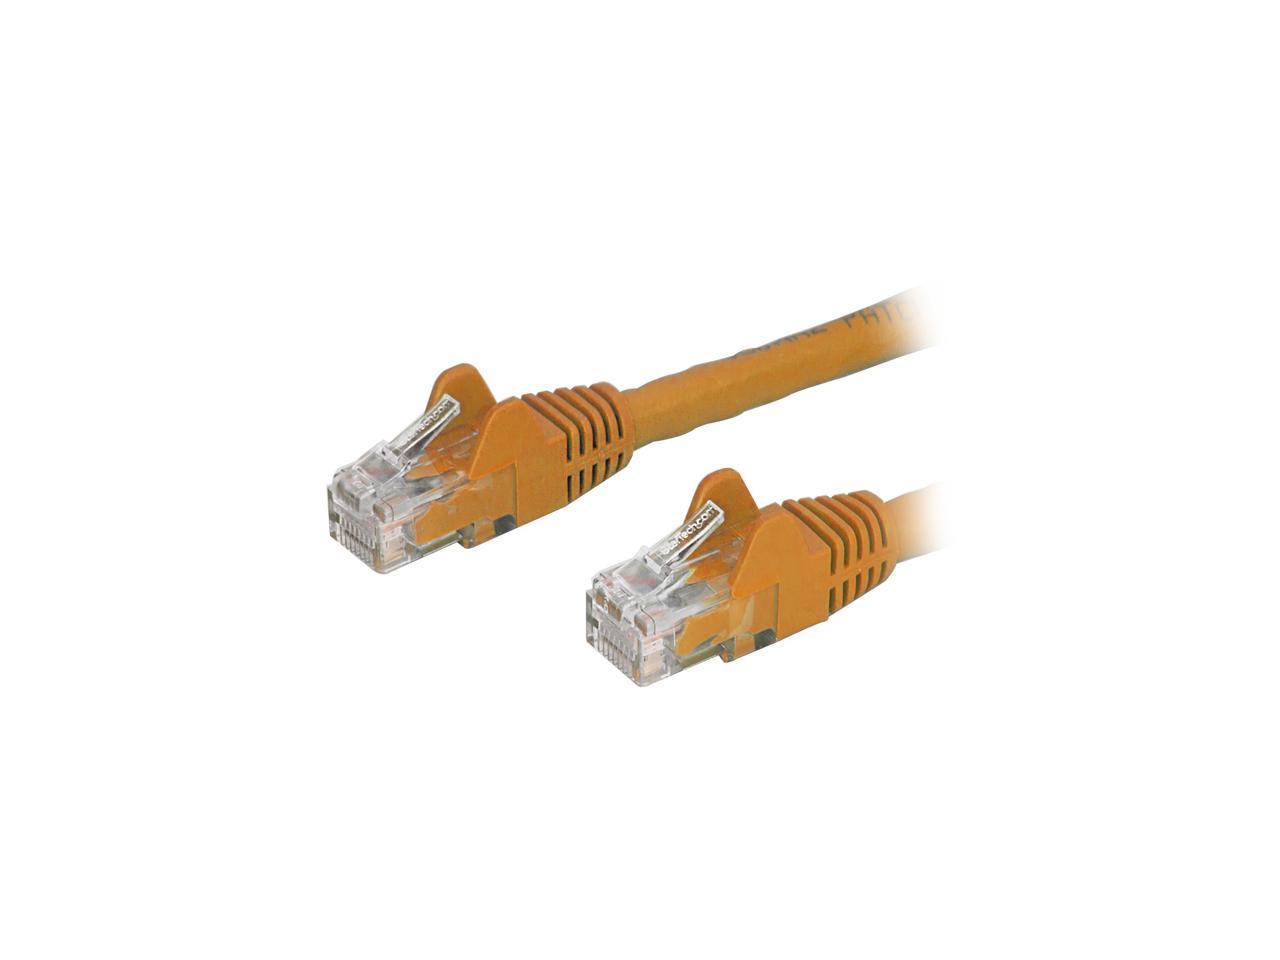 StarTech.com N6PATCH150OR 150 ft. Cat 6 Orange Cat 6 Cables - image 1 of 2